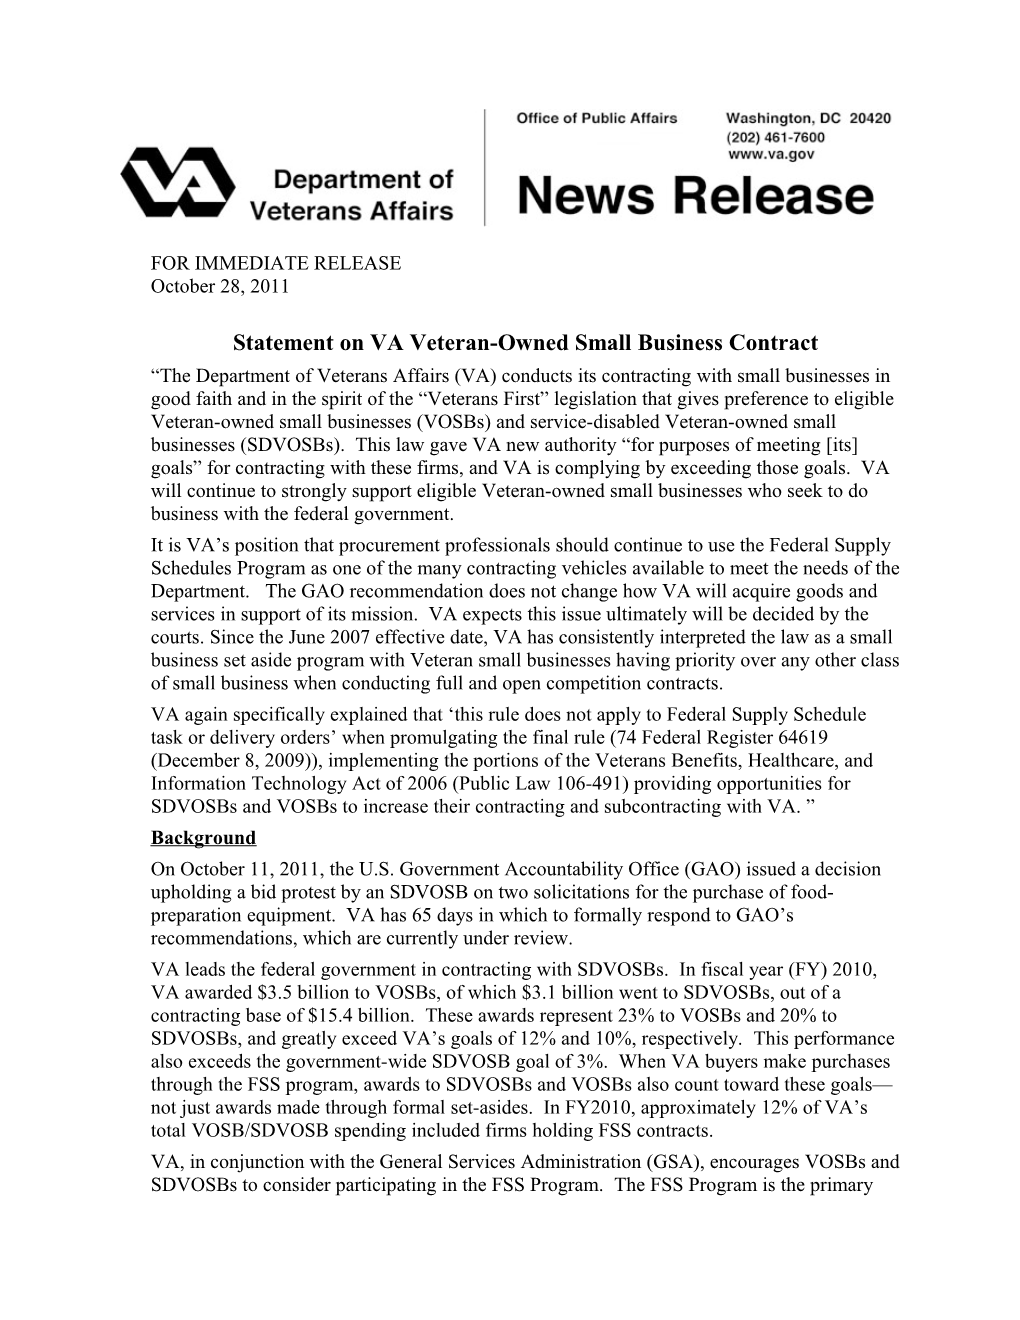 Statement on VA Veteran-Owned Small Business Contract